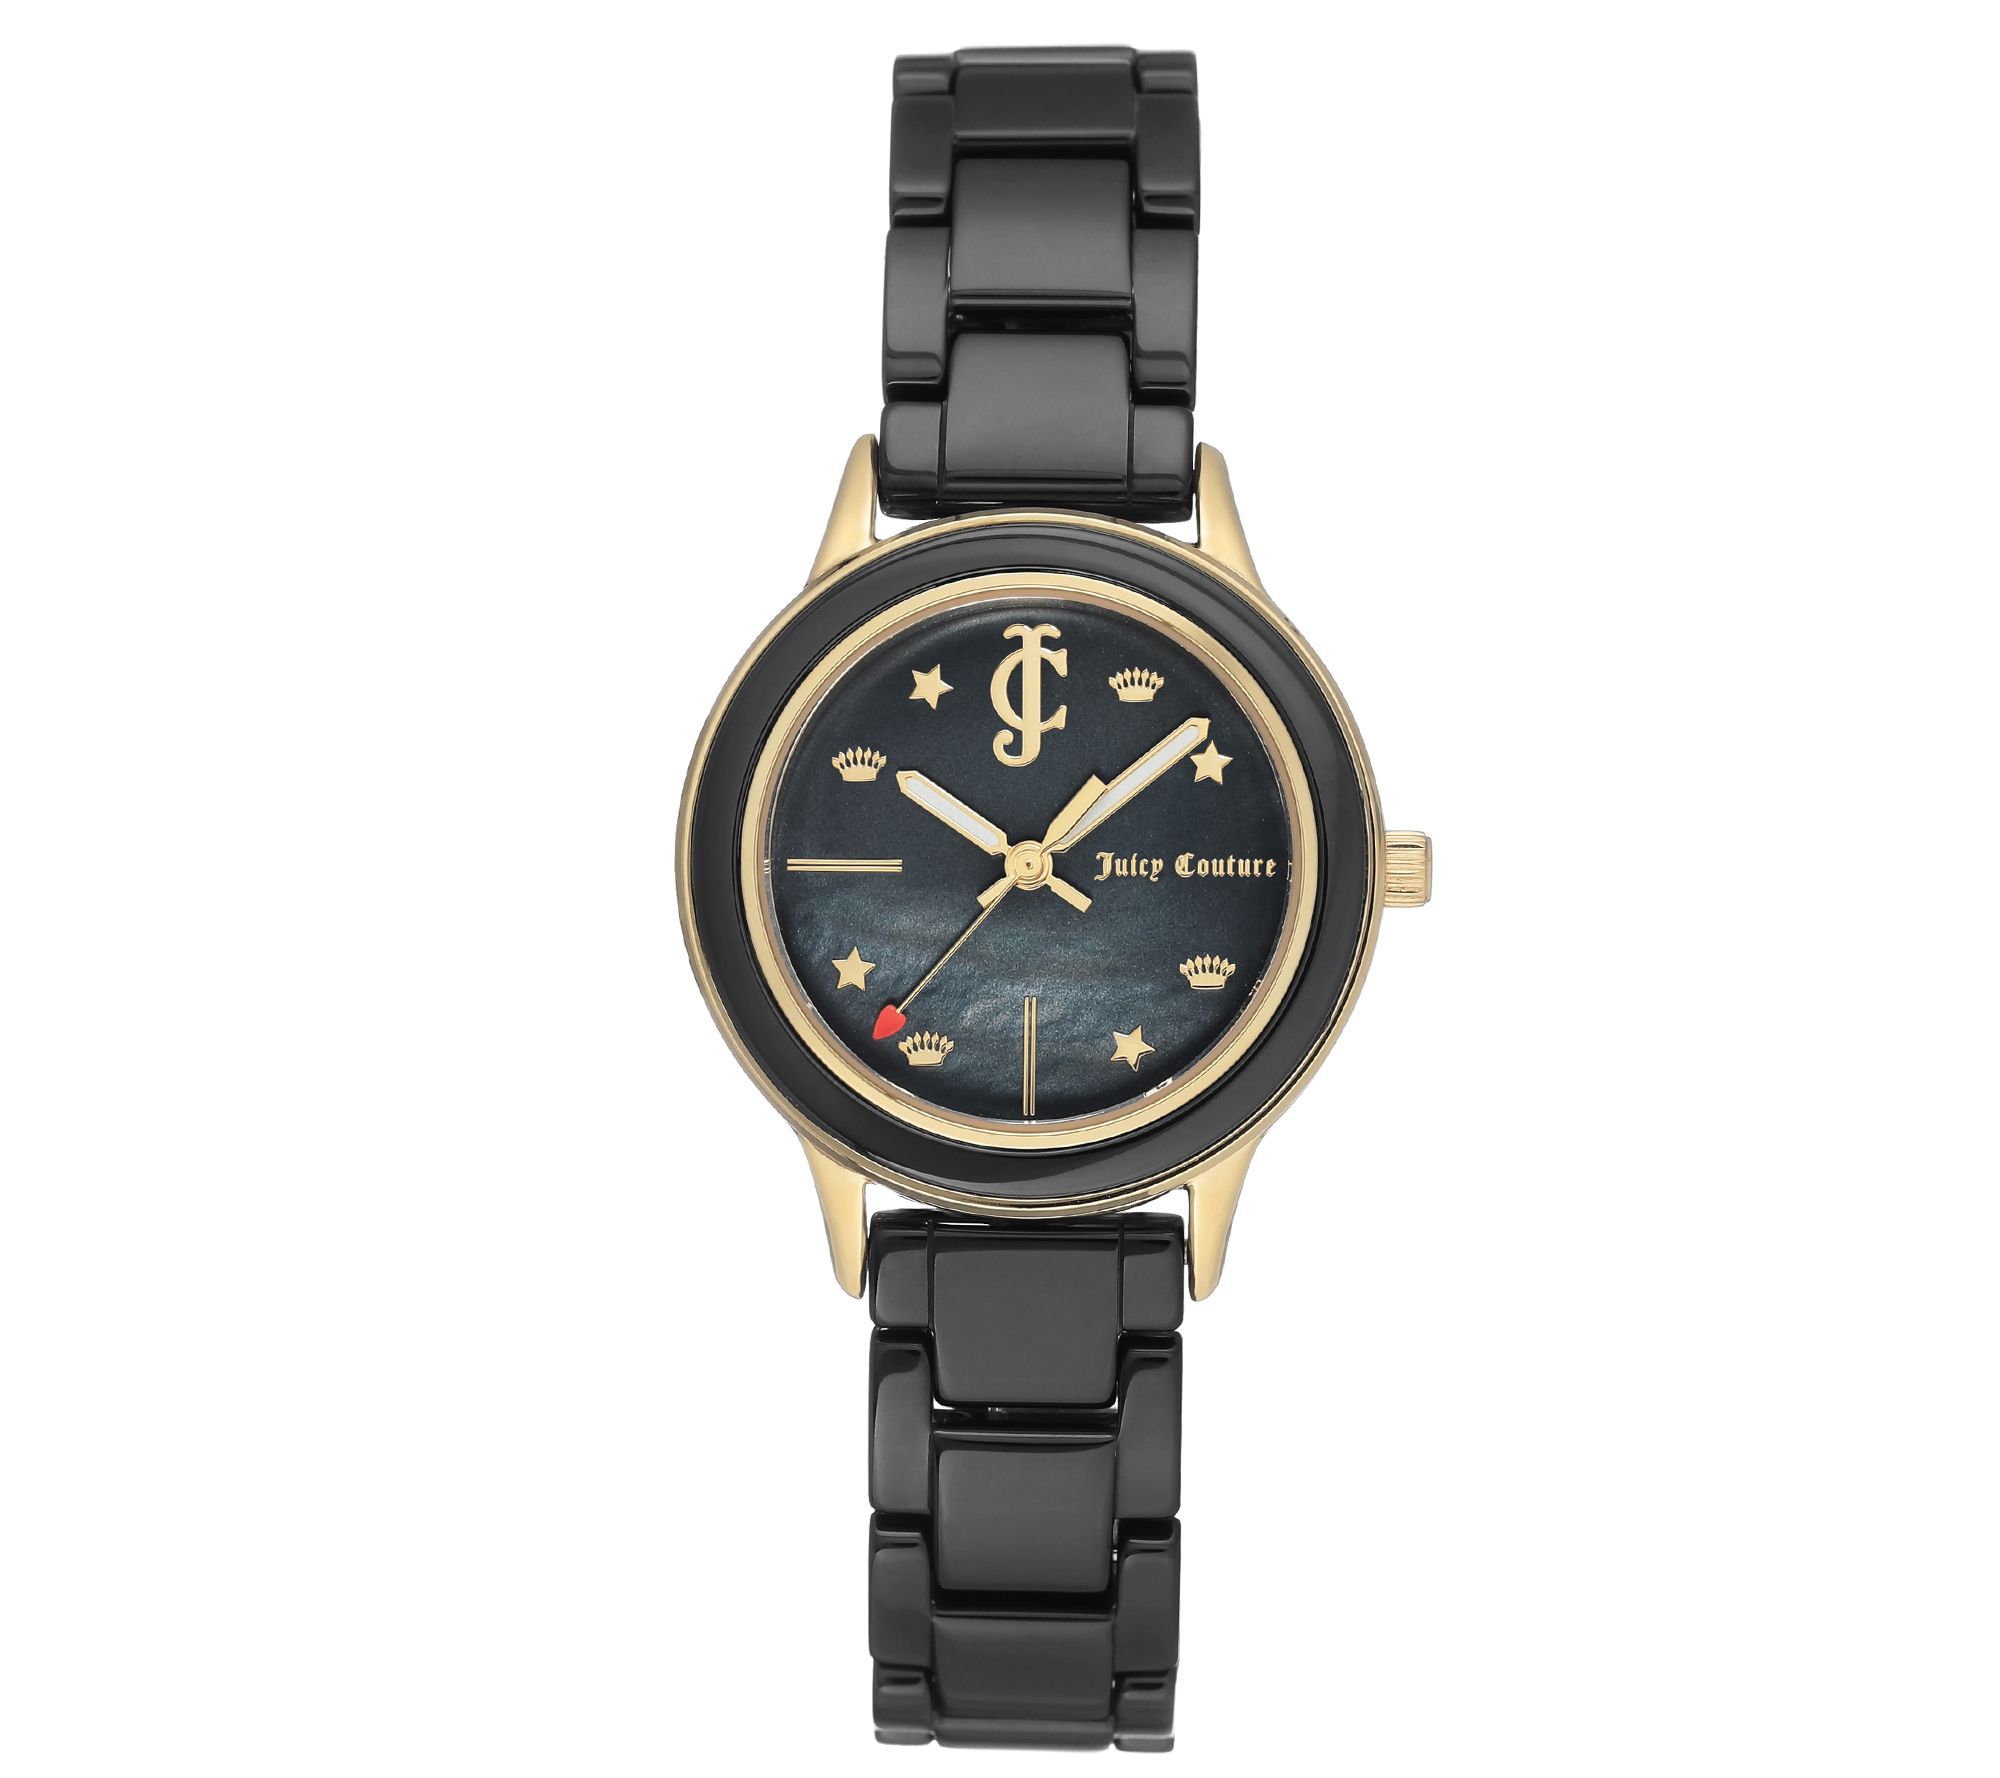 Juicy Couture Black Ceramic Watch w/ Mother-of-Pearl Dial - QVC.com